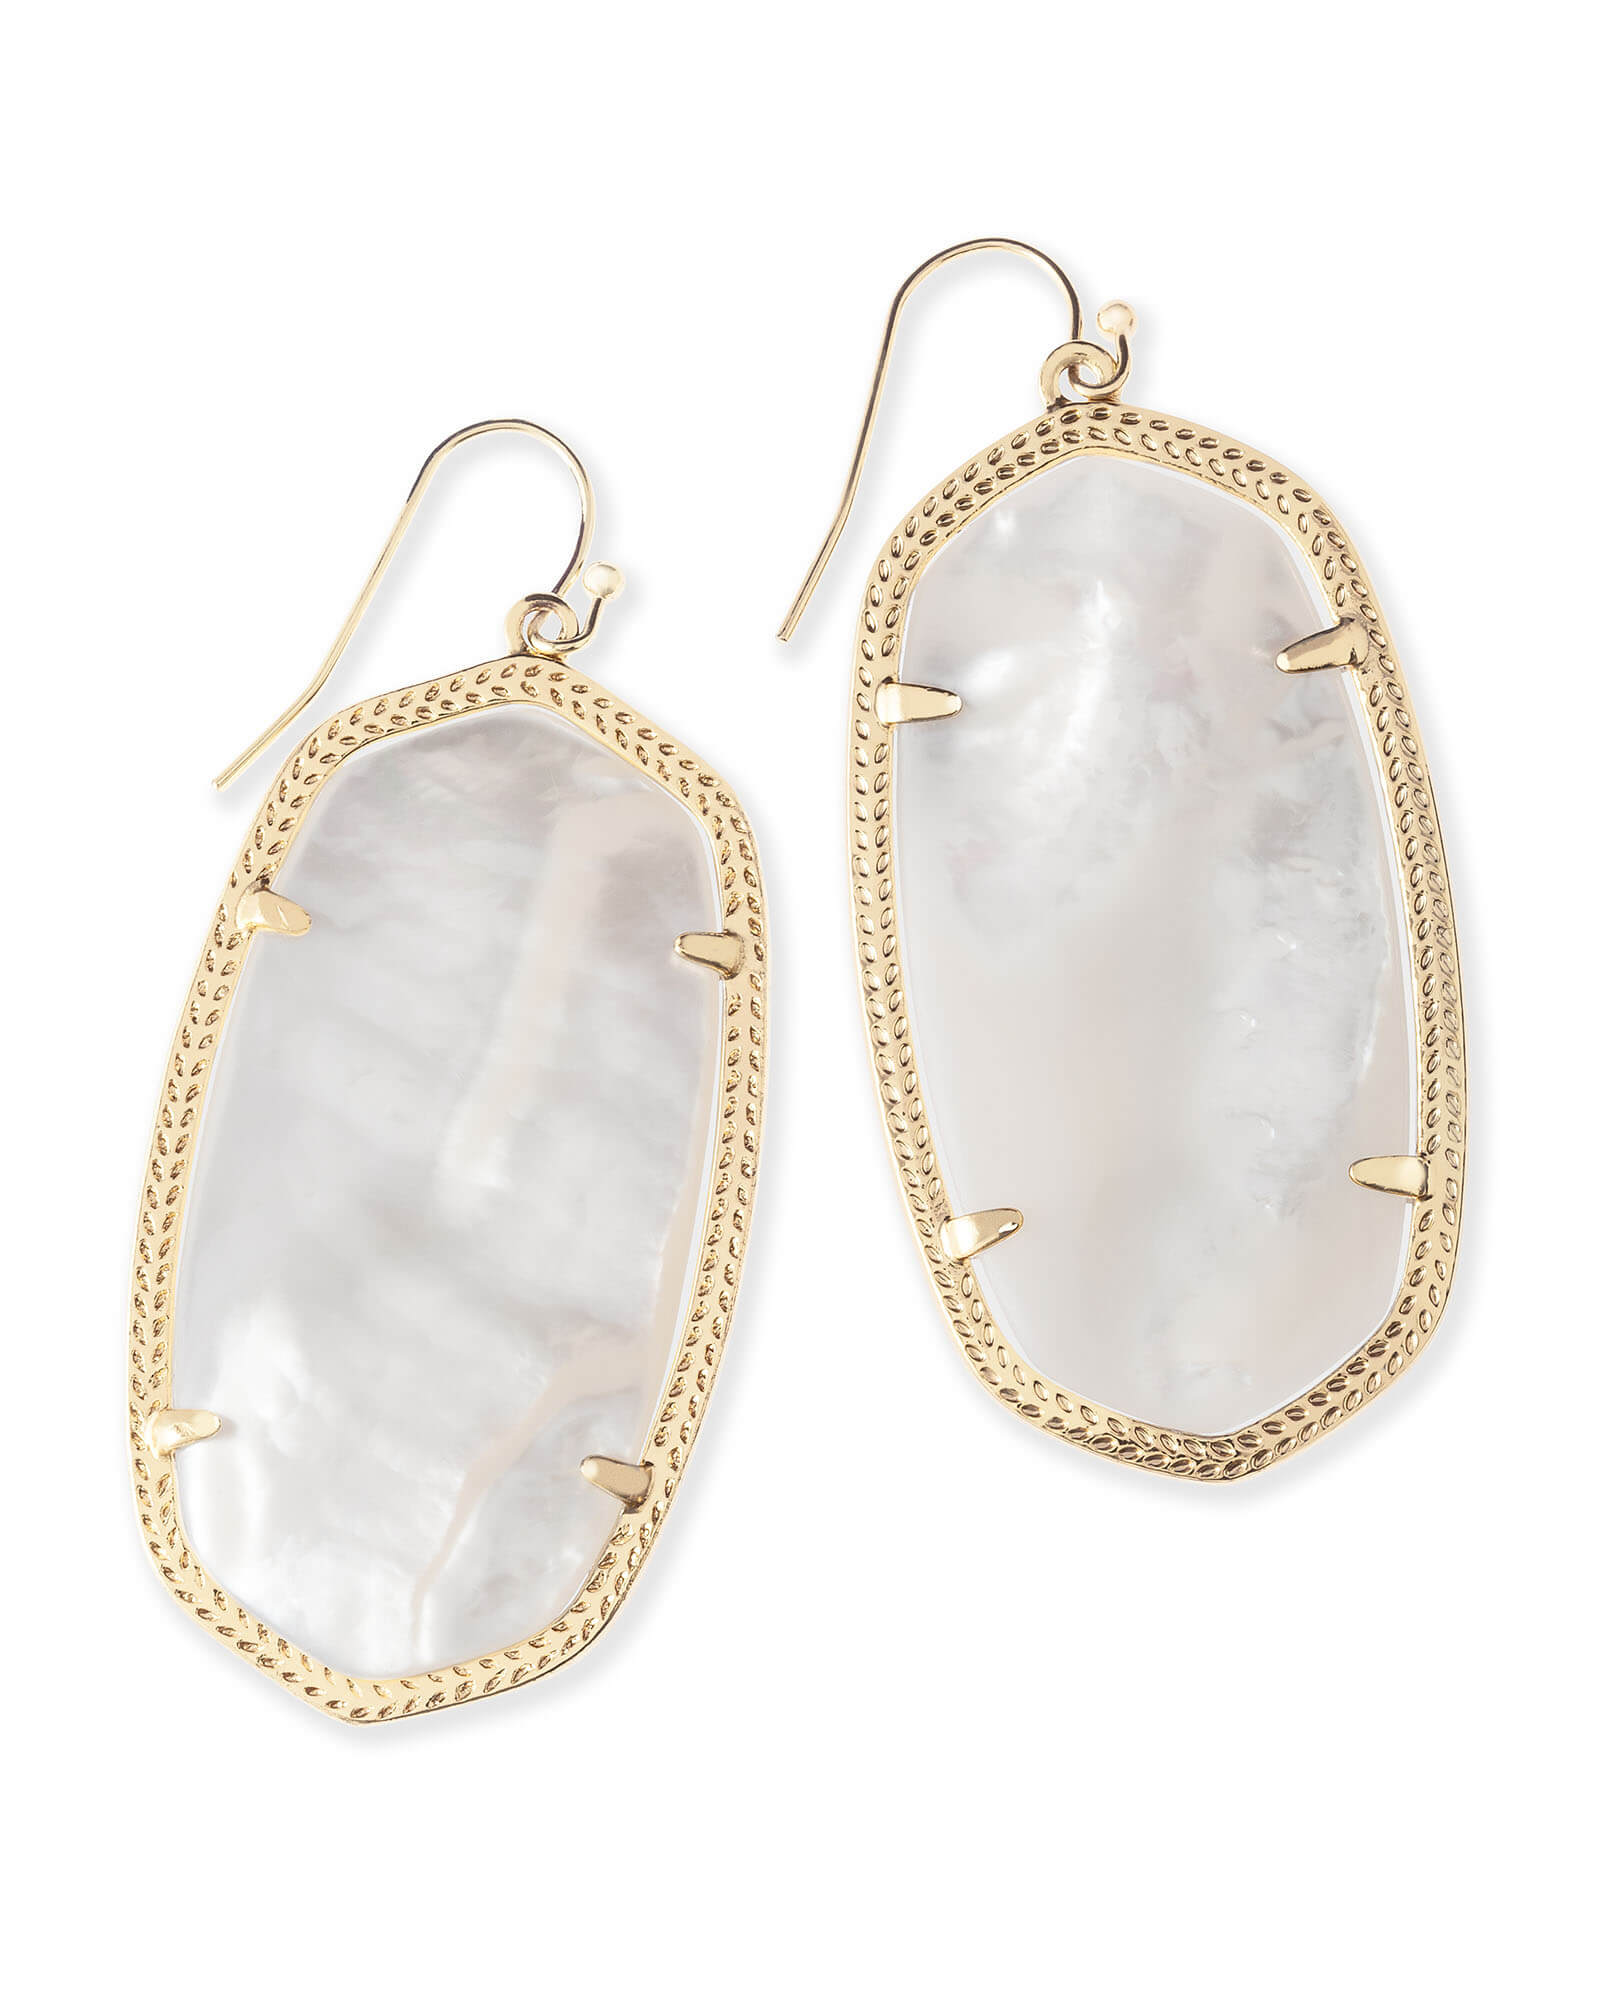 Kendra Scott Danielle Gold Statement Earrings in Ivory Mother-of-Pearl | Mother Of Pearl